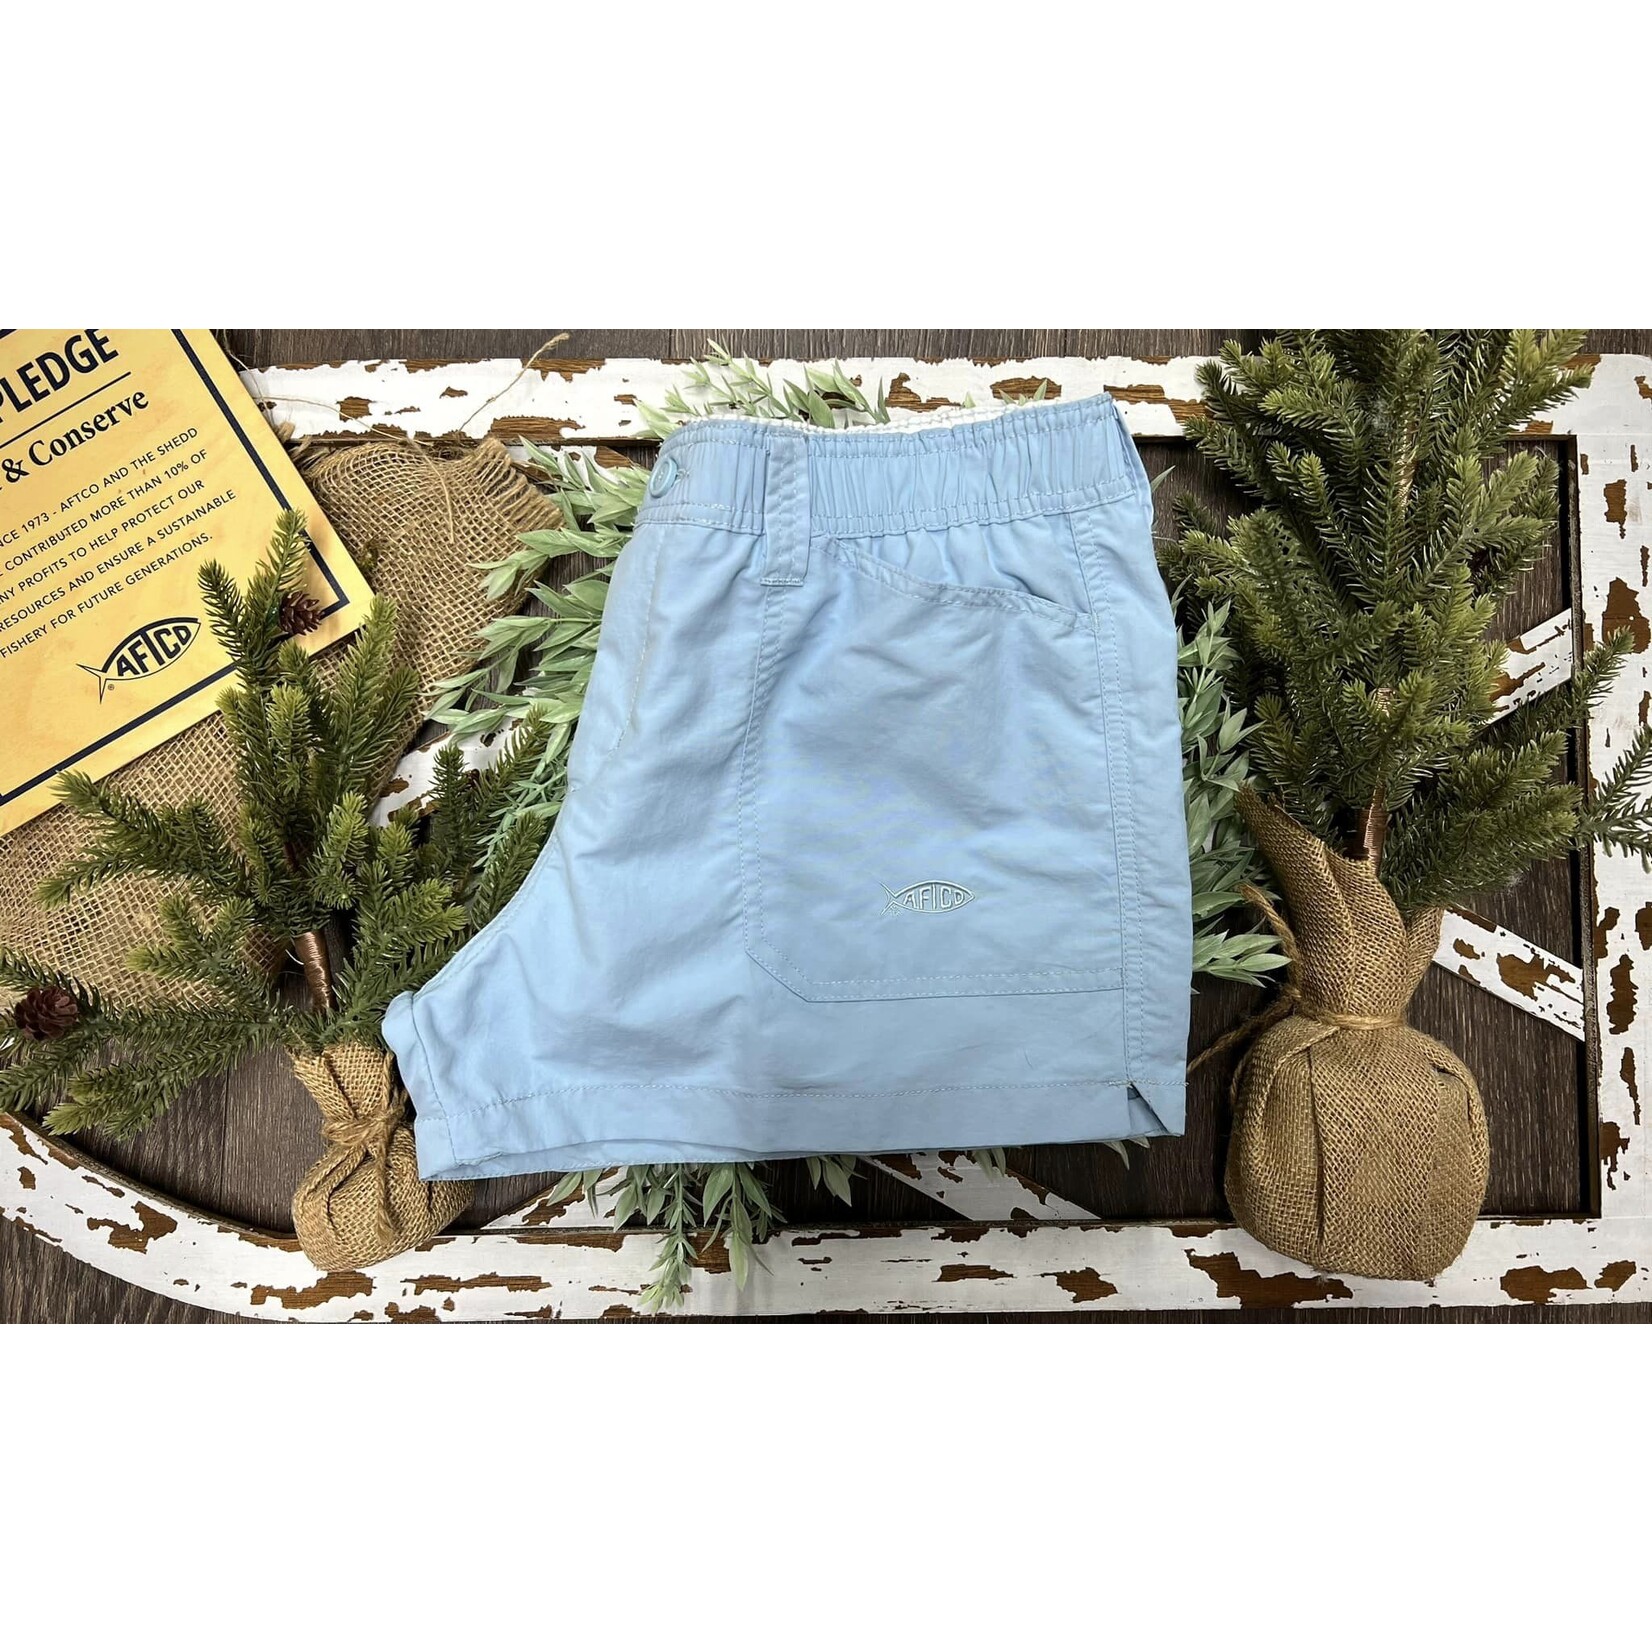 Aftco W01 Women's Original Fishing Shorts - EZN Outfitters